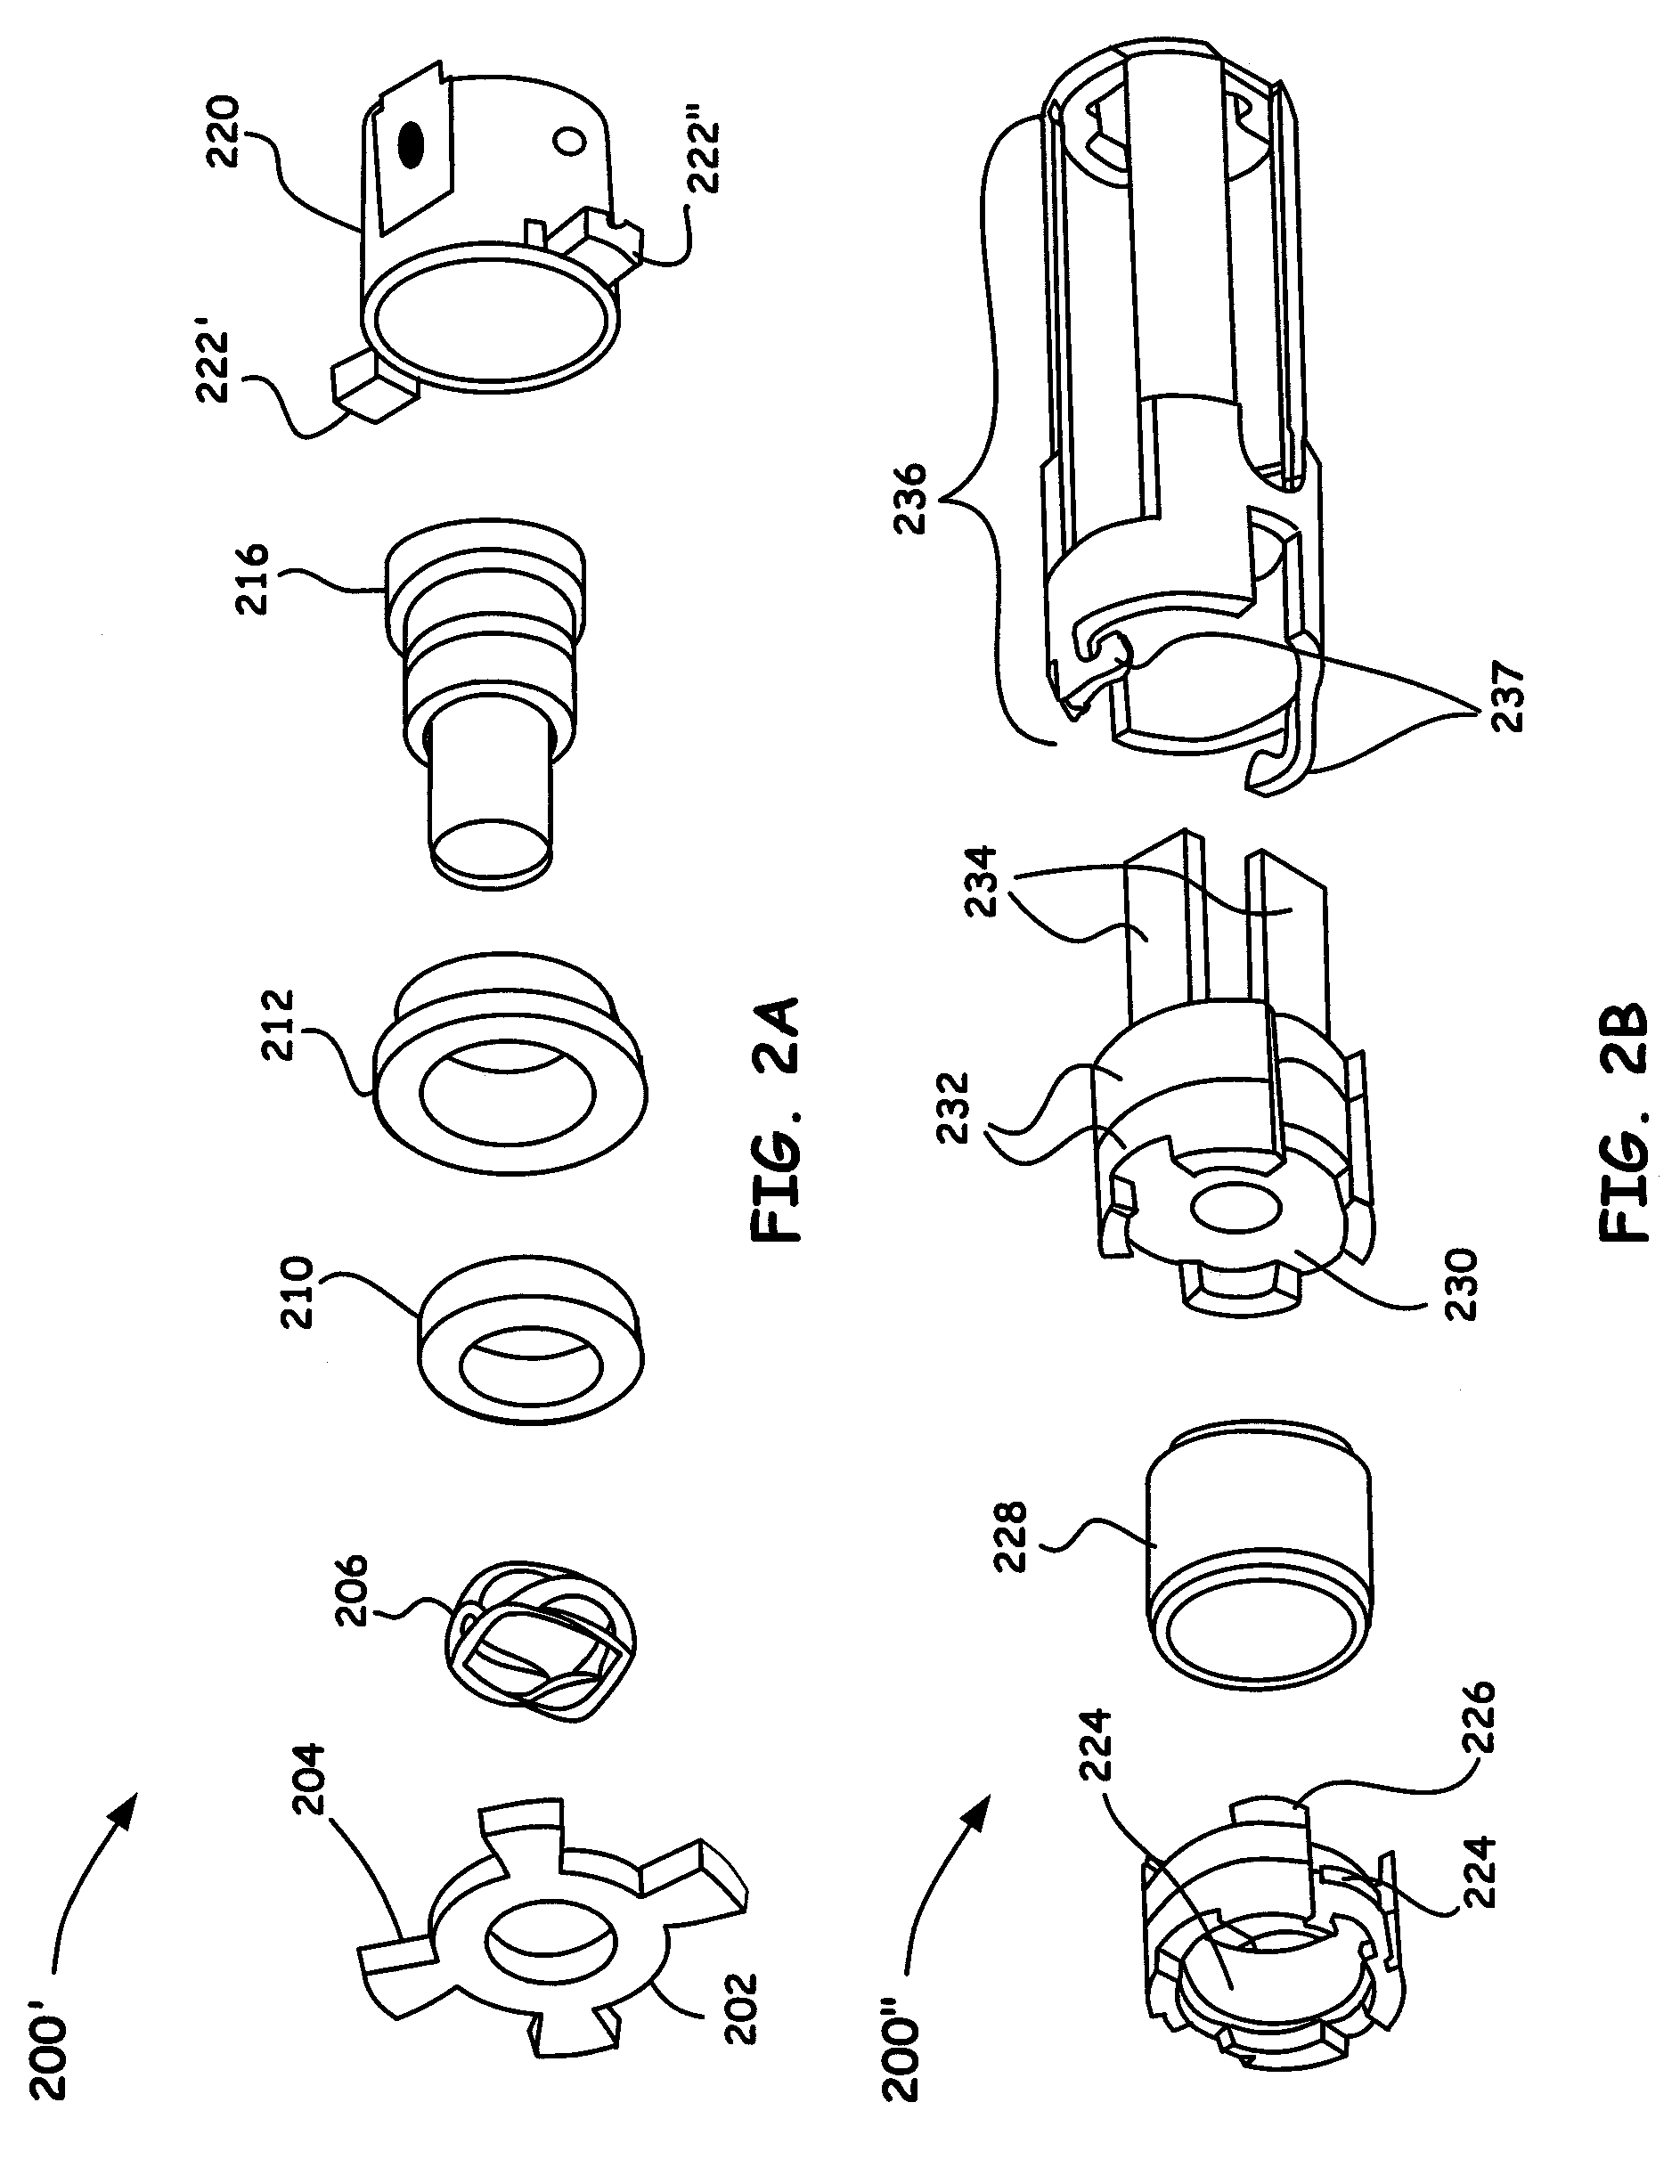 Removable ion source that does not require venting of the vacuum chamber